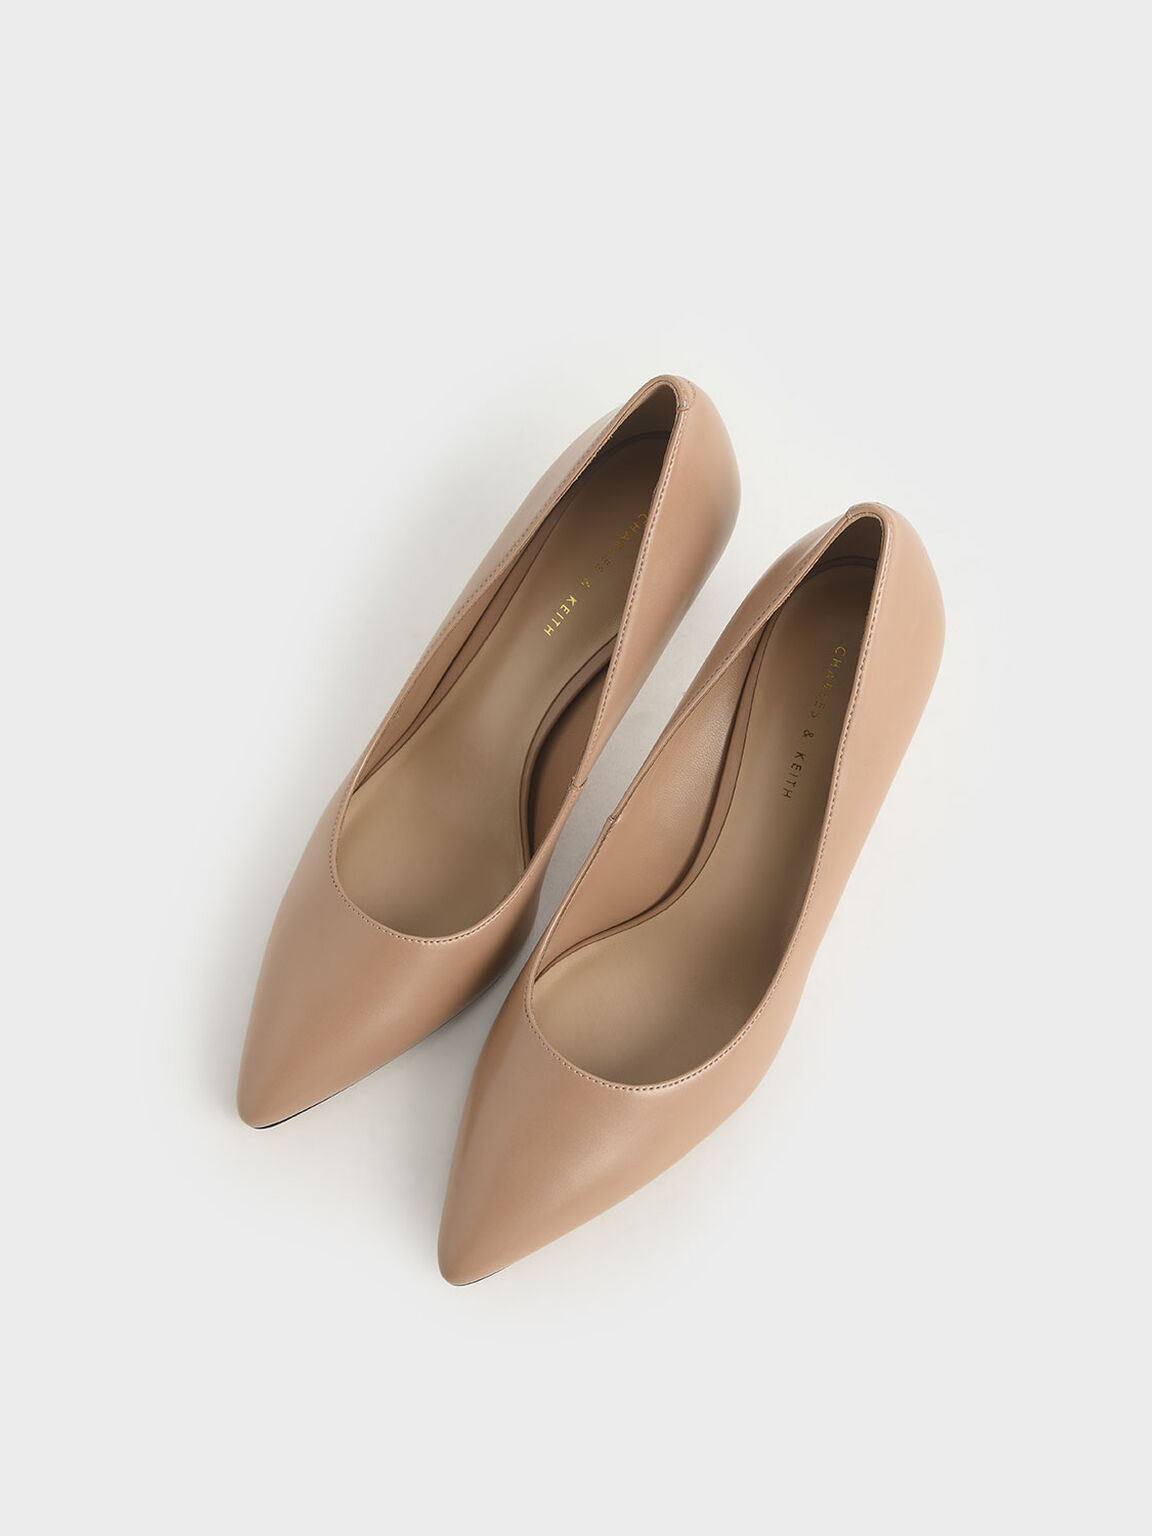 Pointed Toe Pumps, Nude, hi-res